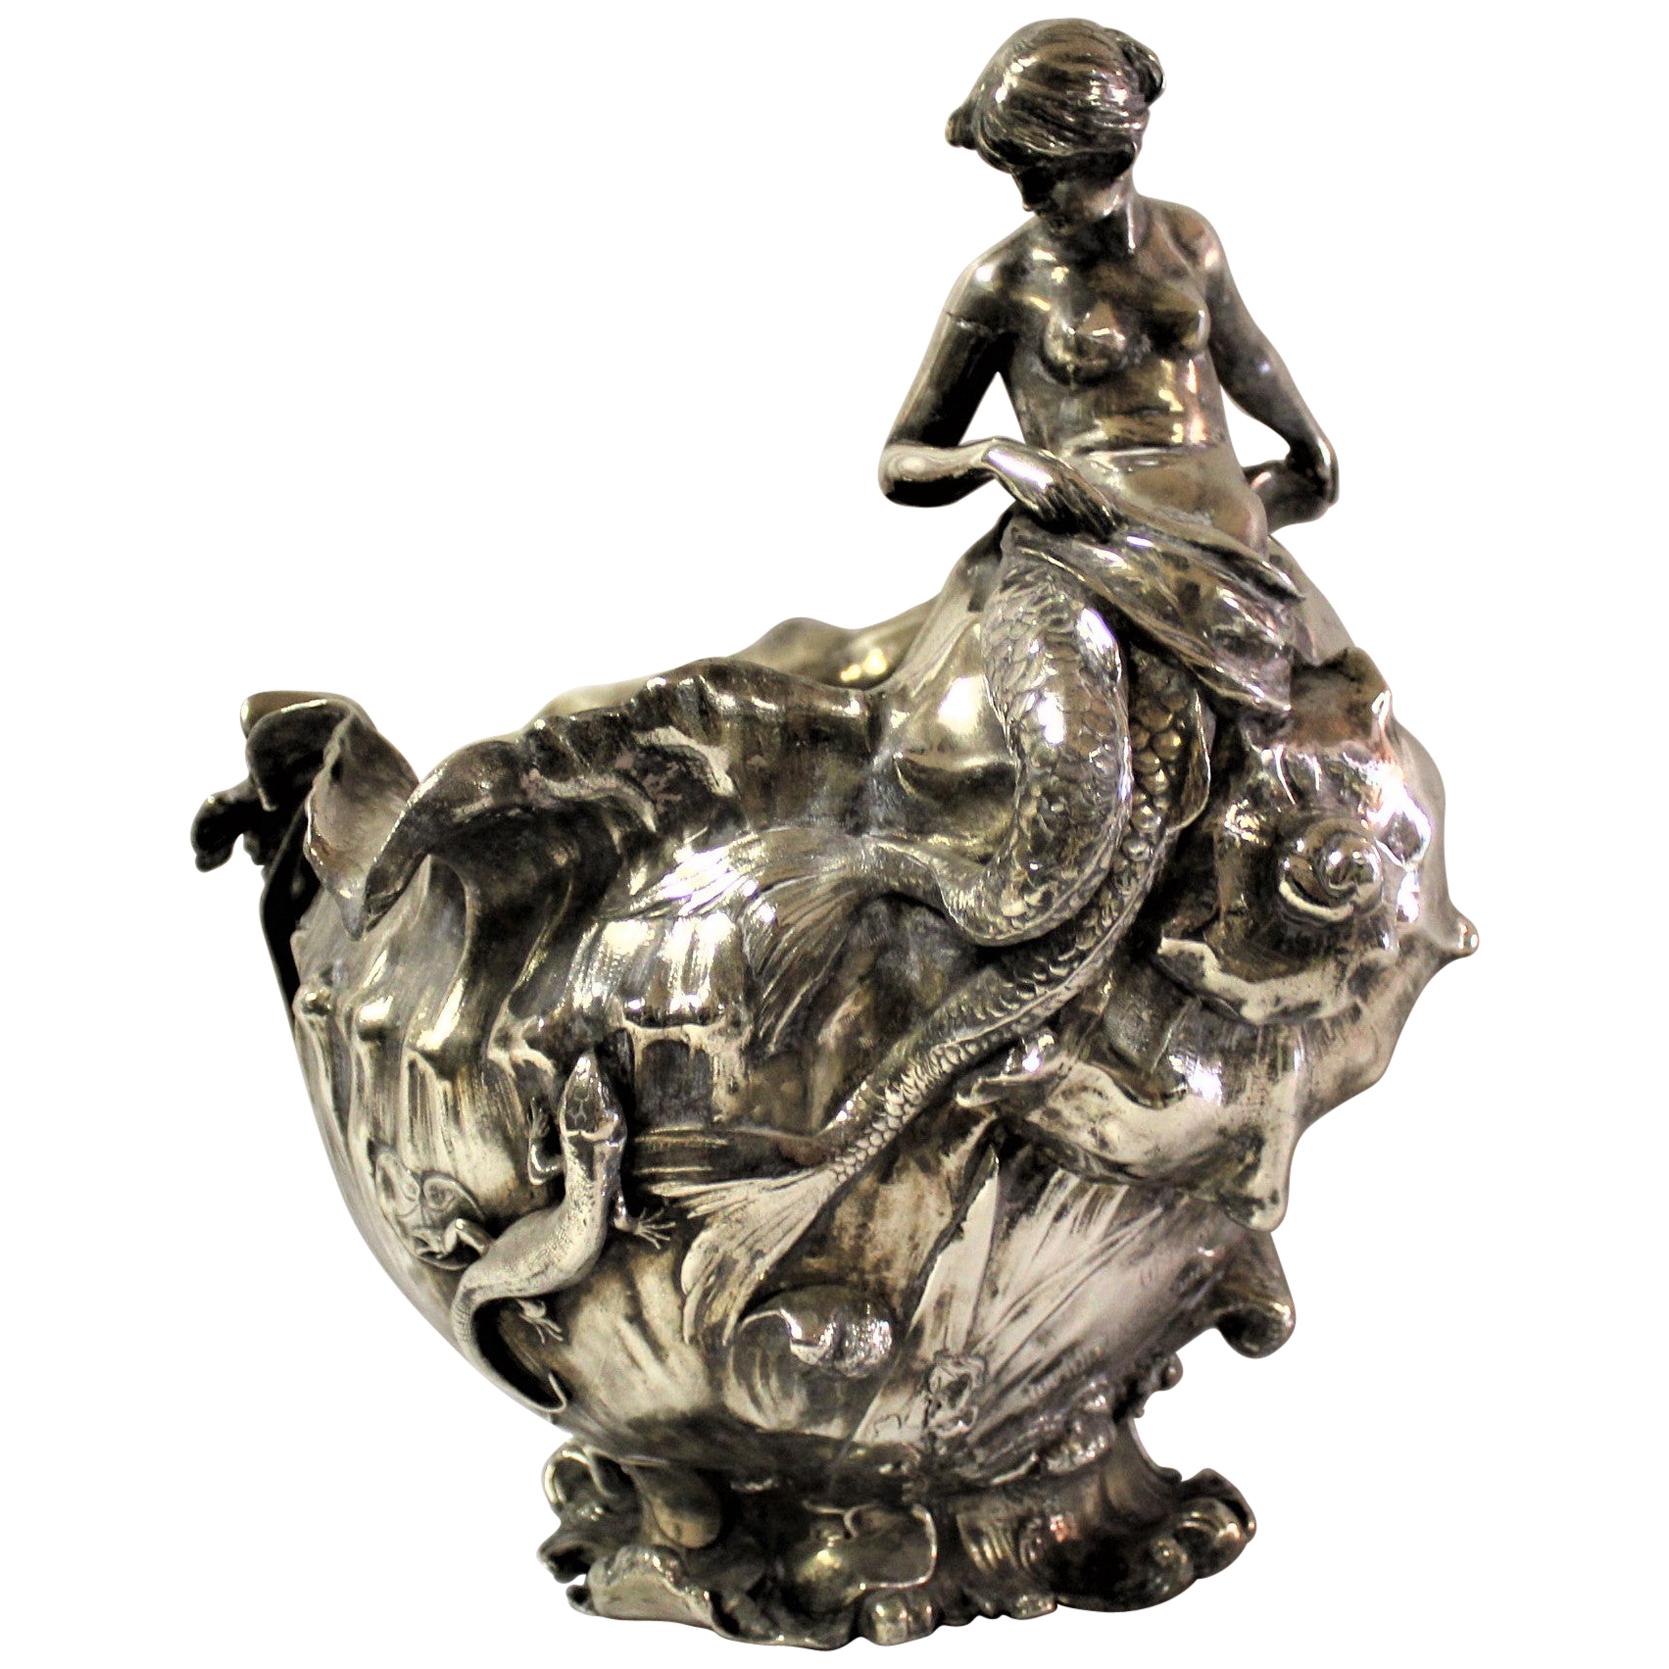 Art Nouveau Vase (Antique )Silver Plate Mermaid, Signed and Dated 1897